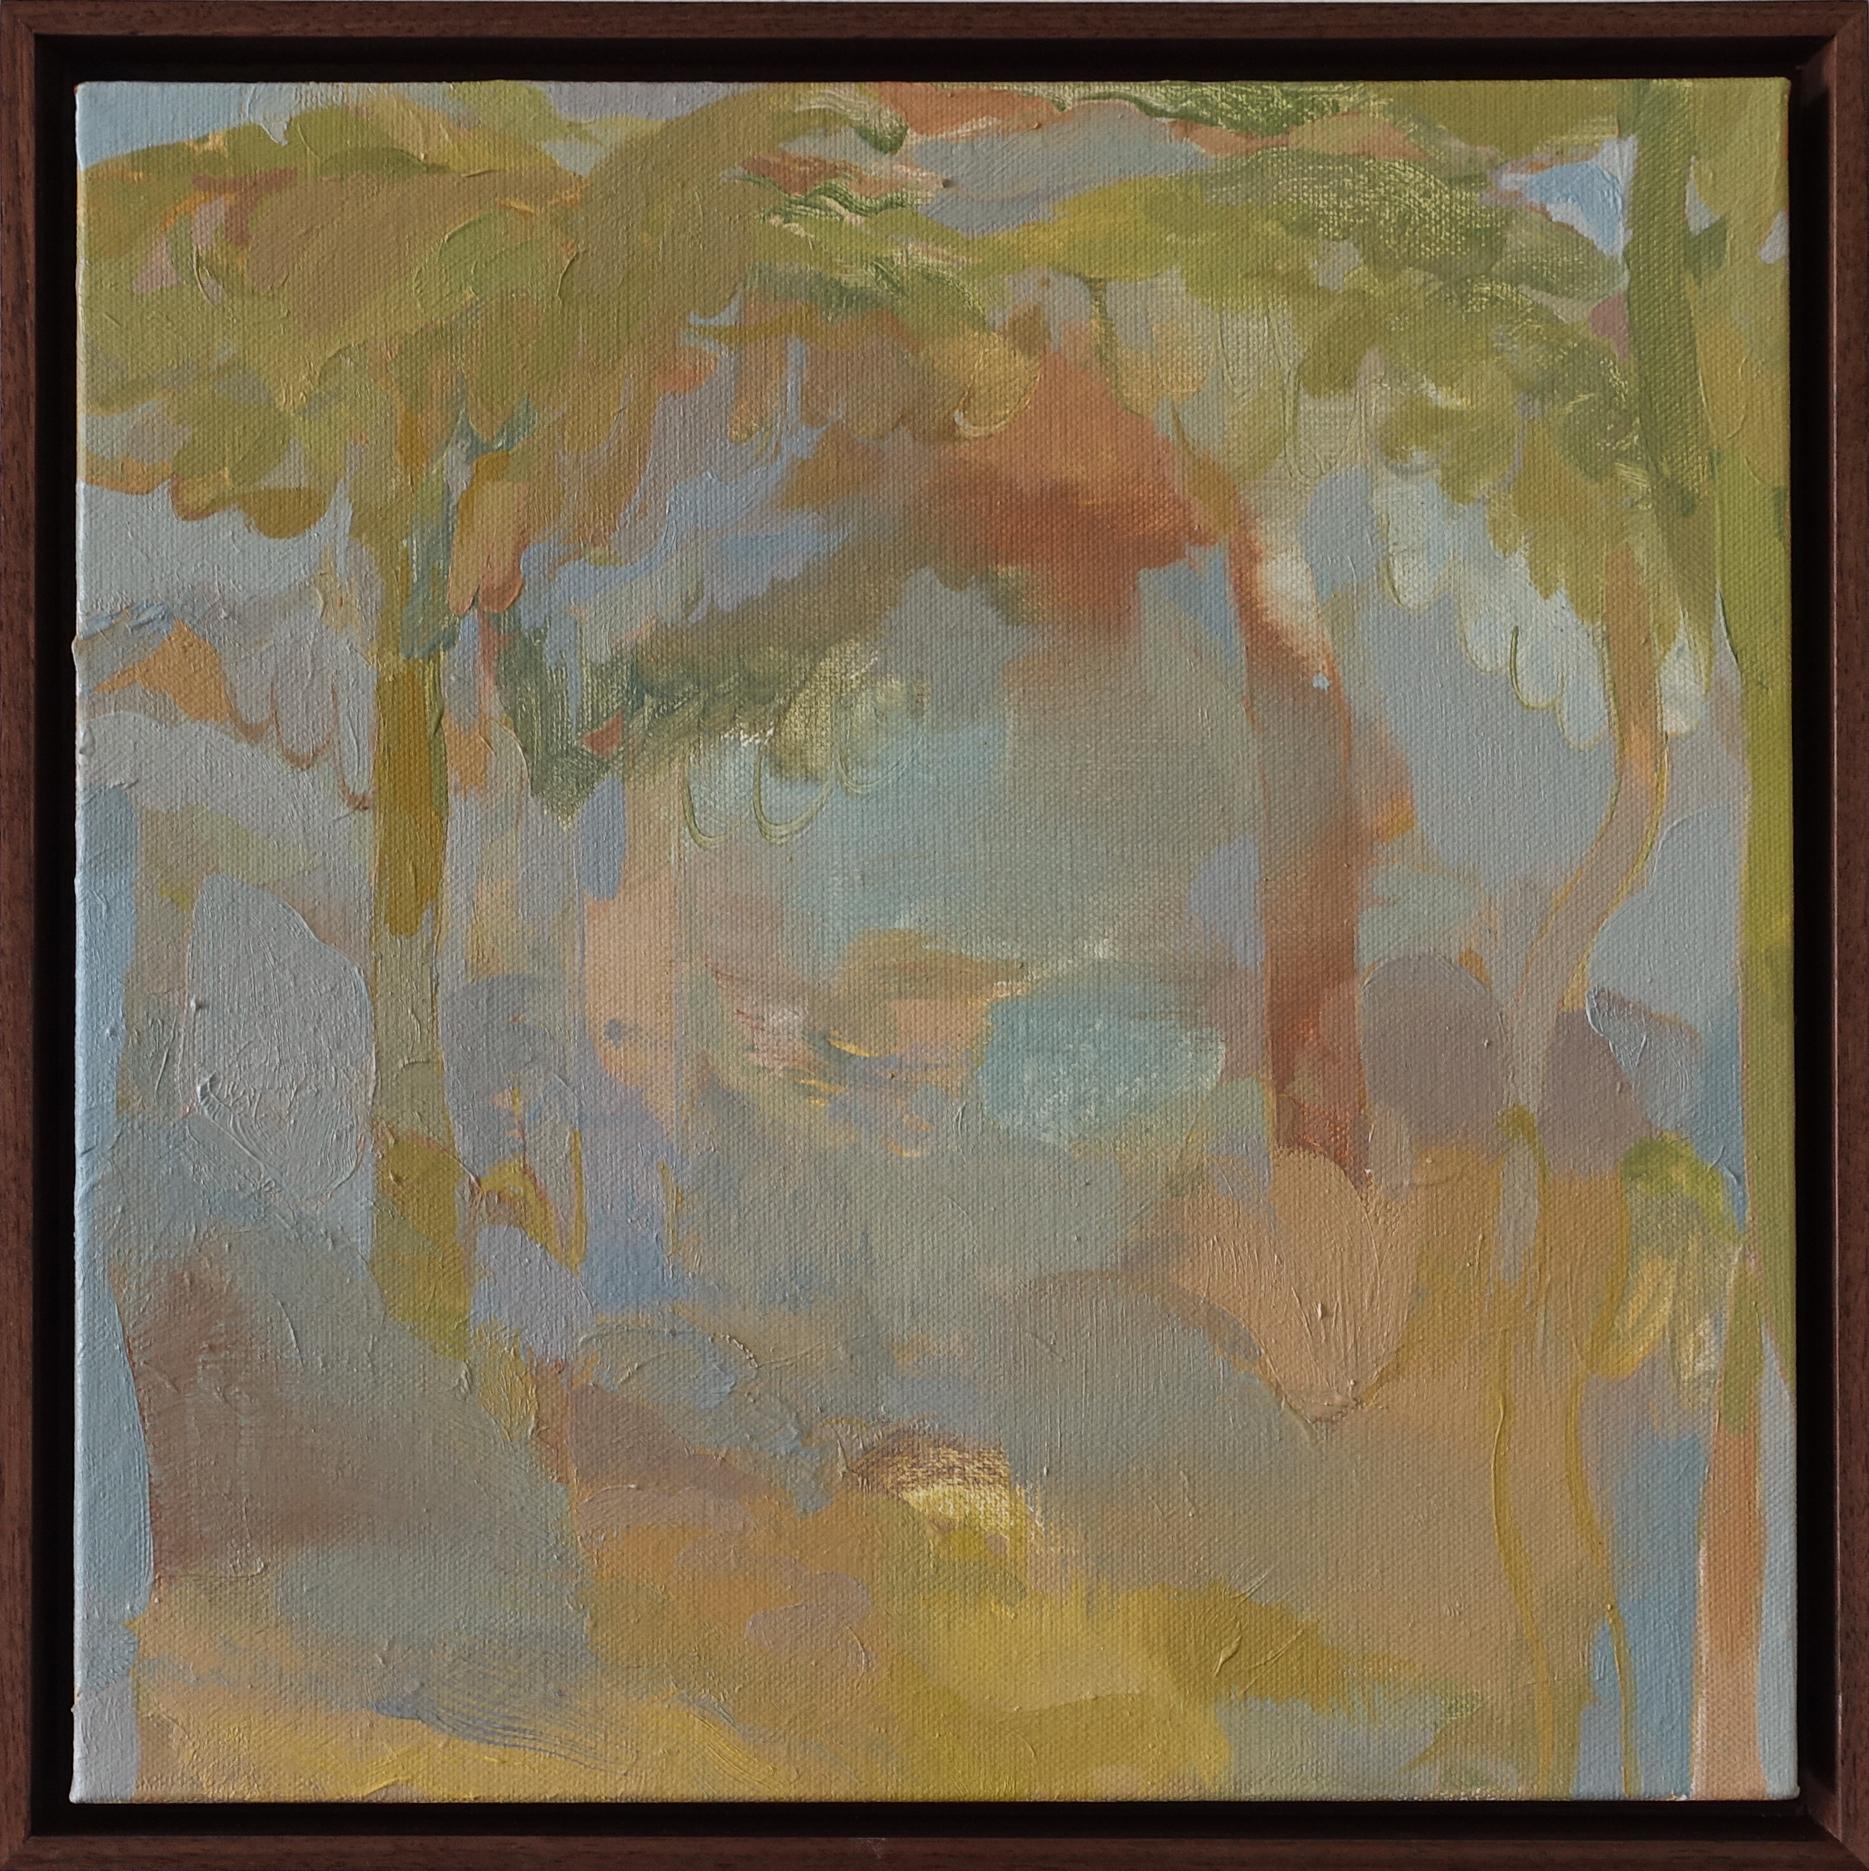 "Kind Of" an abstract landscape painting, oil on canvas by Skylar Hughes. Full of gentle muted colors, Skylar is interested in painting as the representation of our relationship to and experience of nature. The landscape tradition serves as a ground